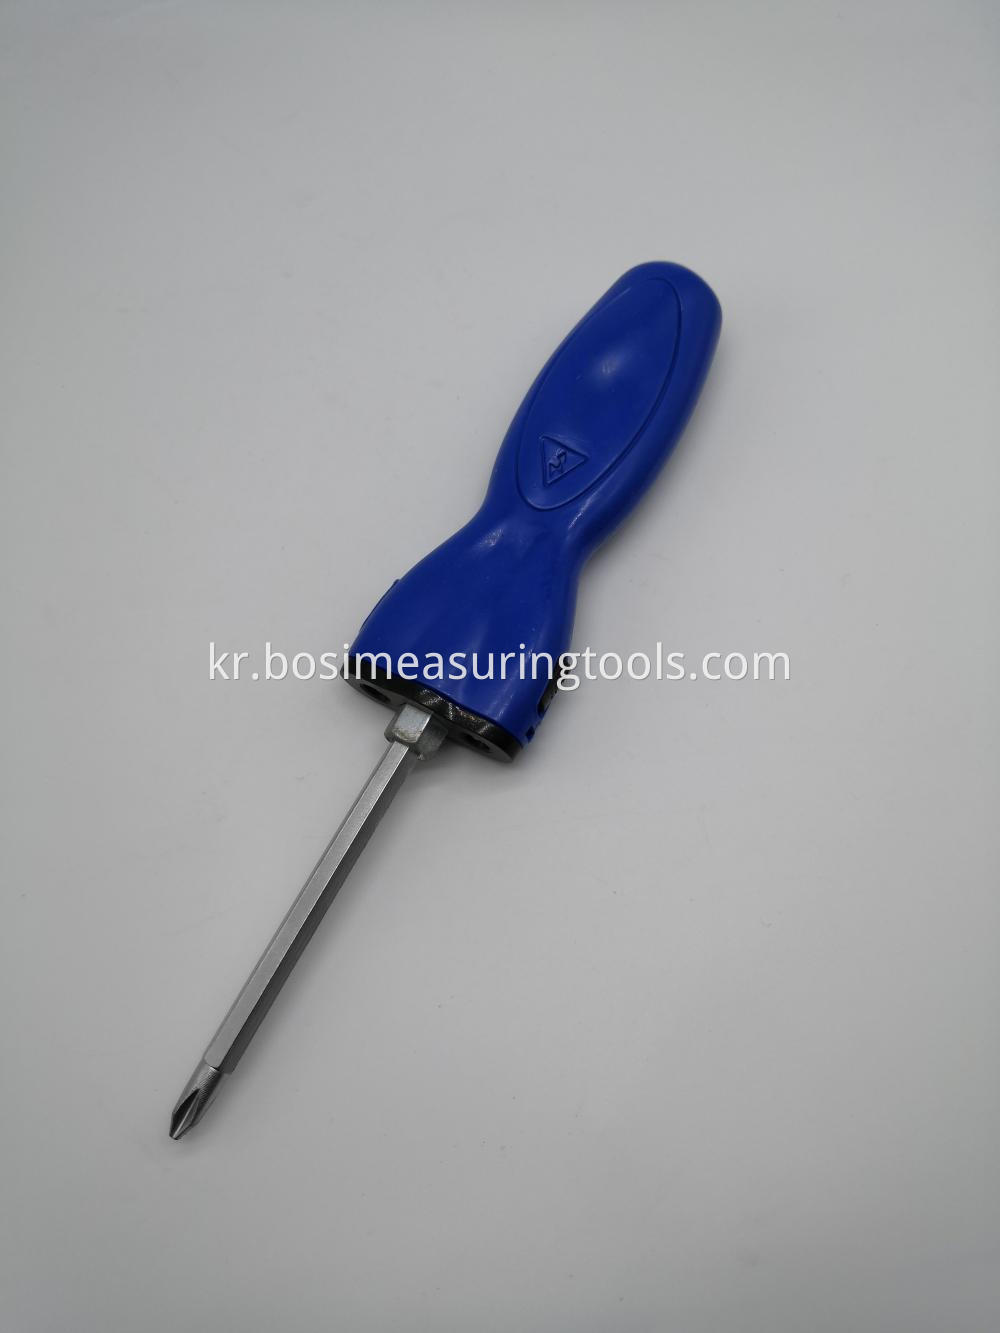 S2 Screwdriver For Household Use With LED